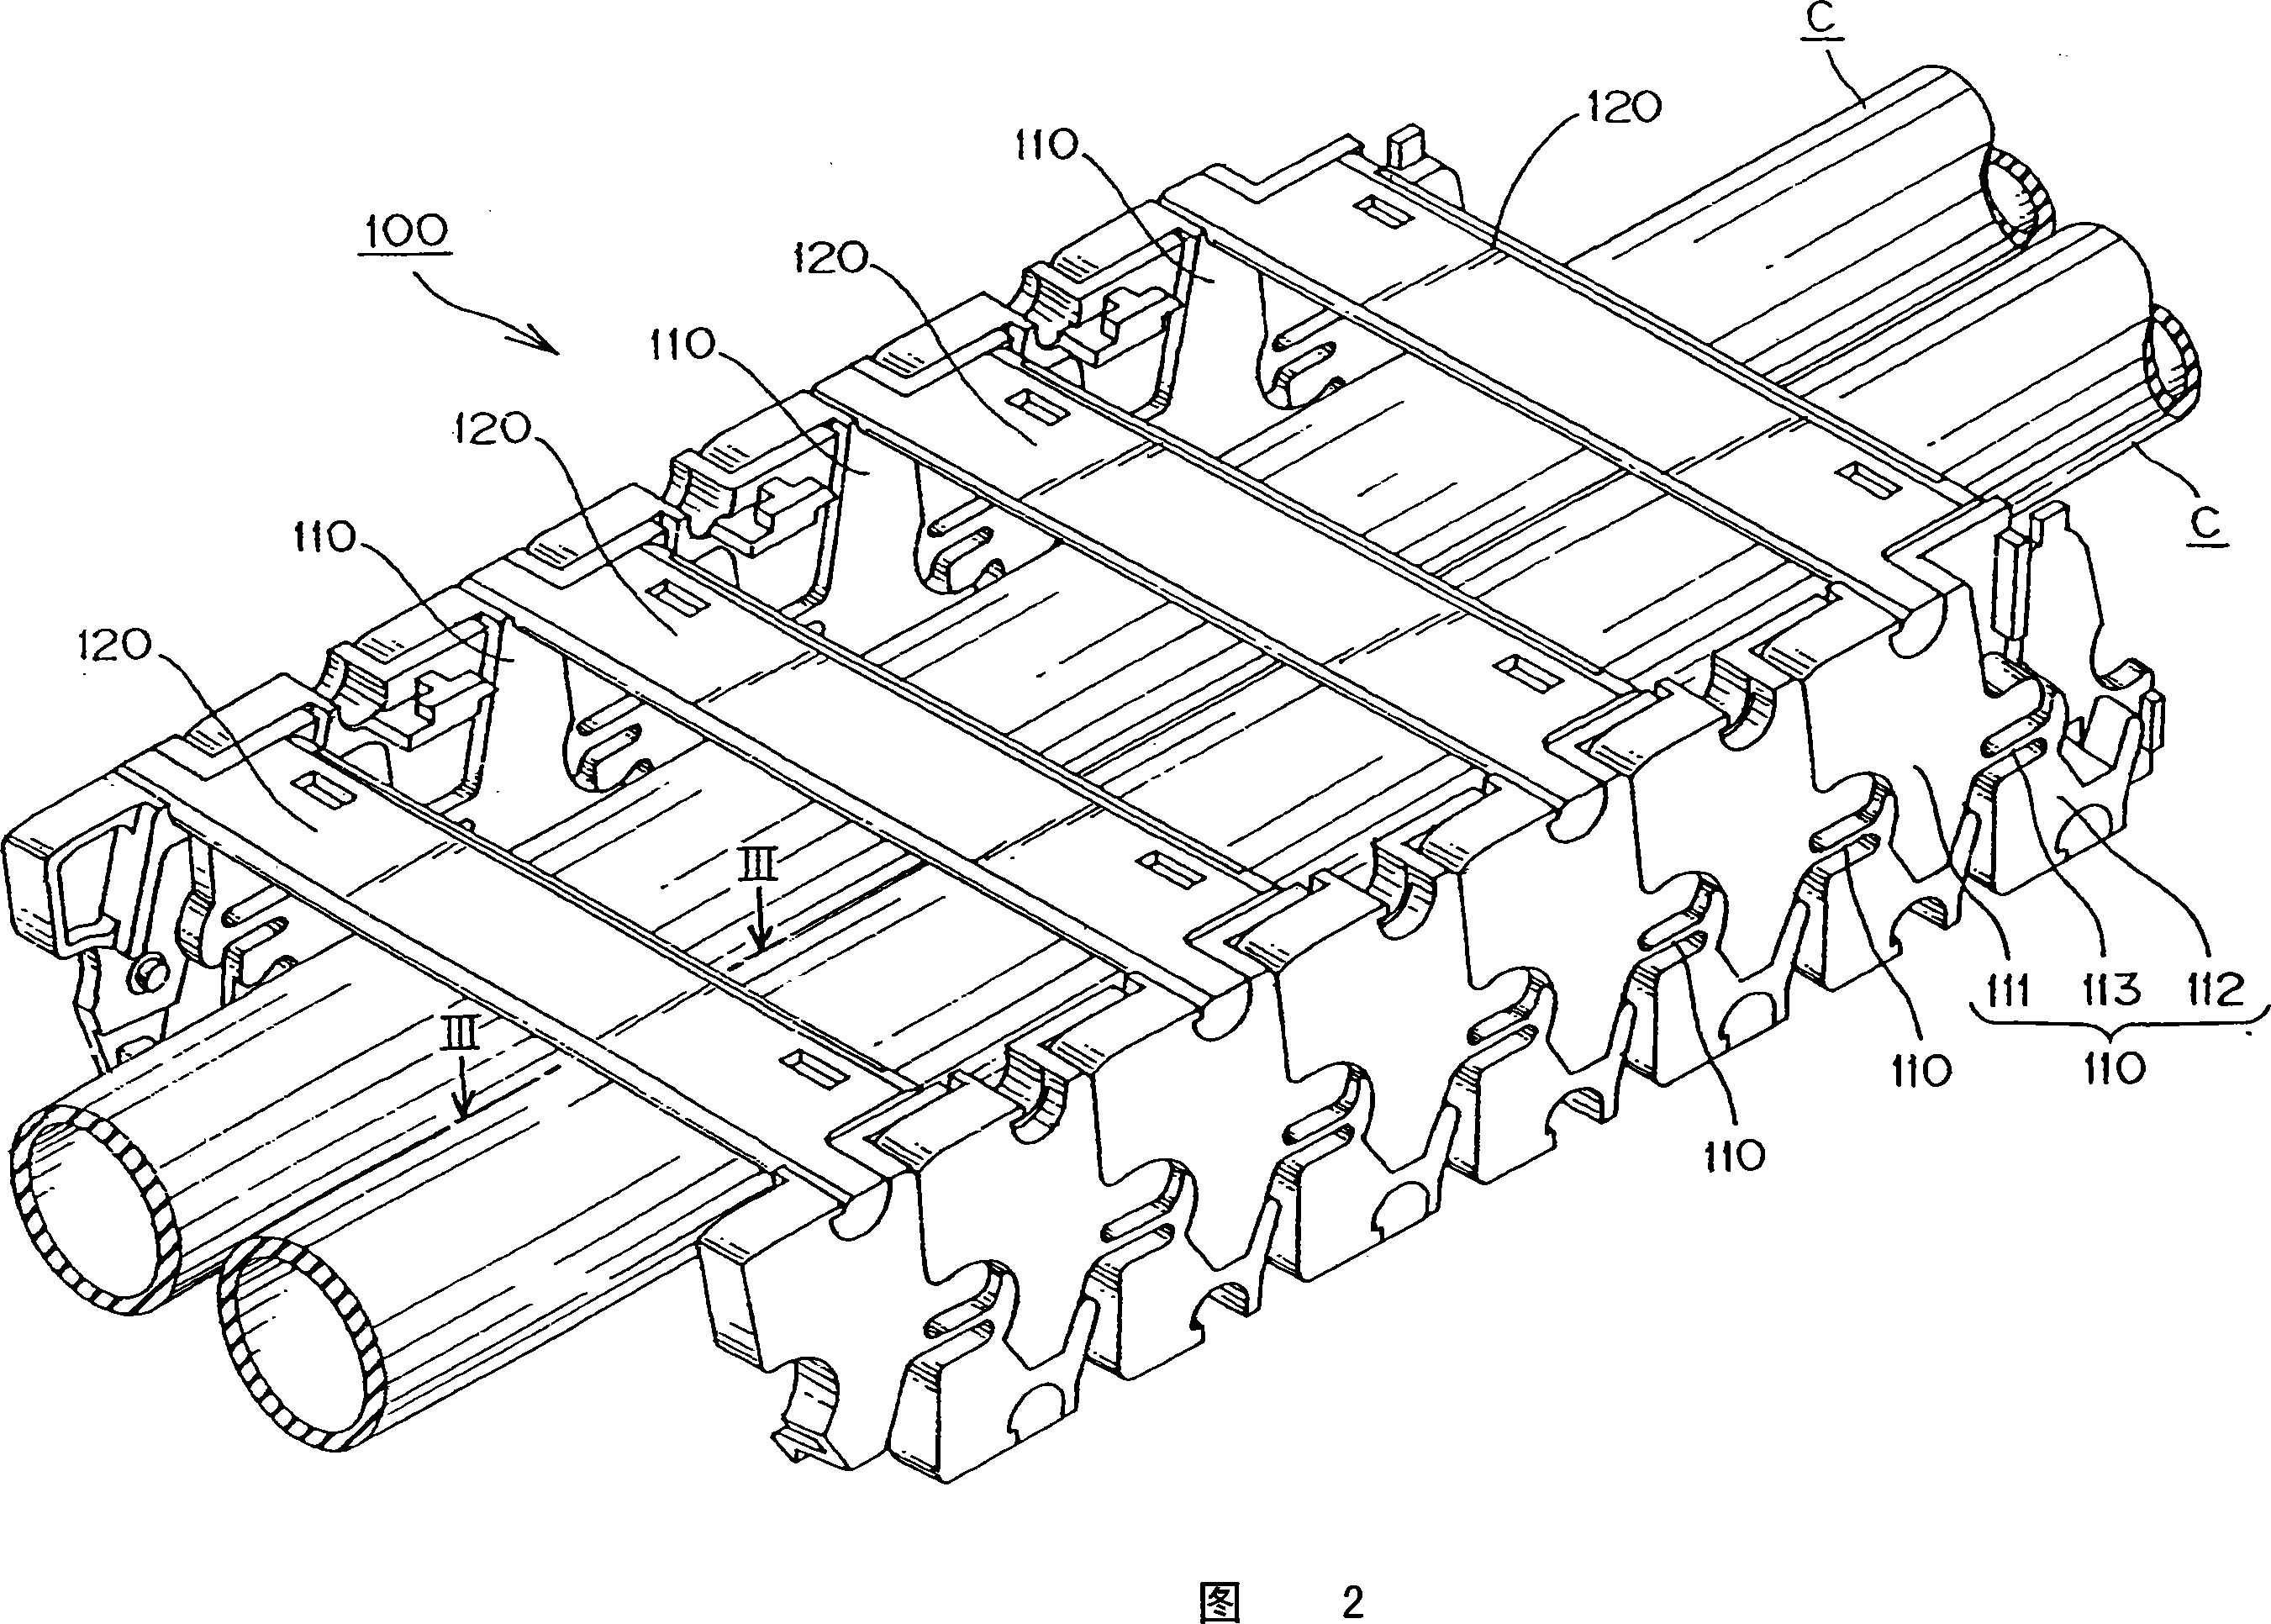 Cable protection guiding device